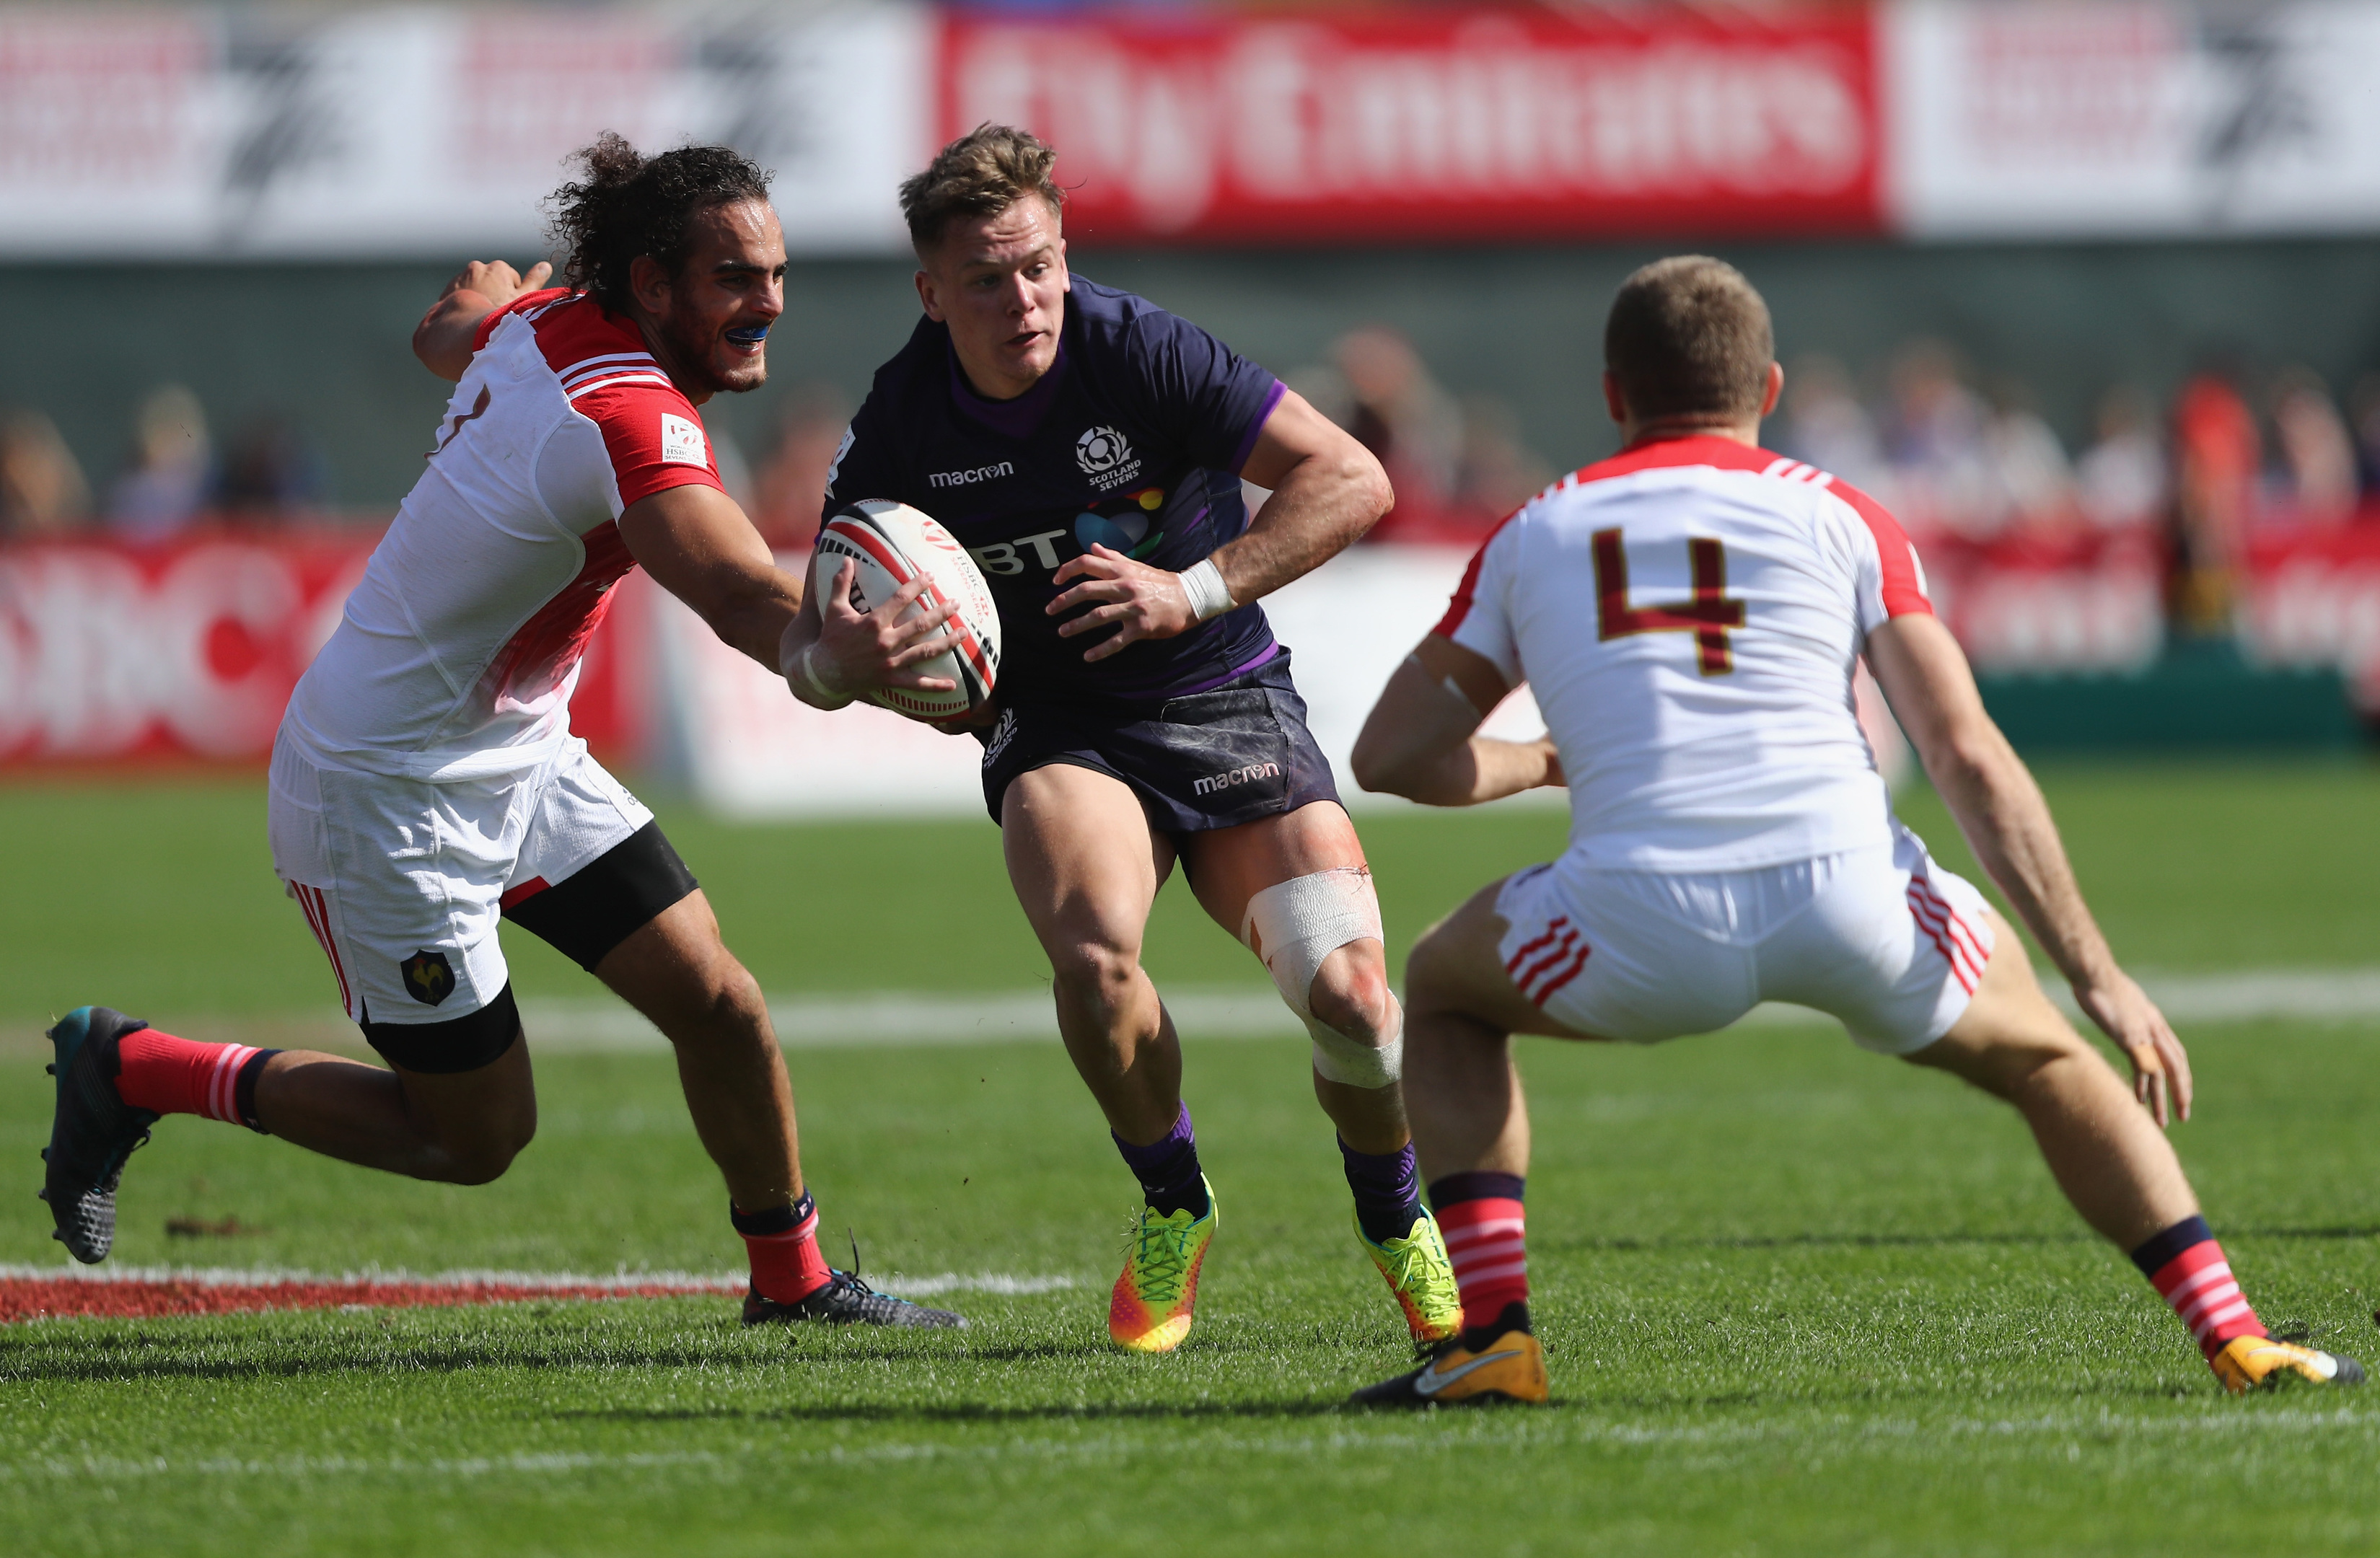 Darcy Graham starred fro Scotland 7s in Dubai last week and now makes his debut for Edinburgh.